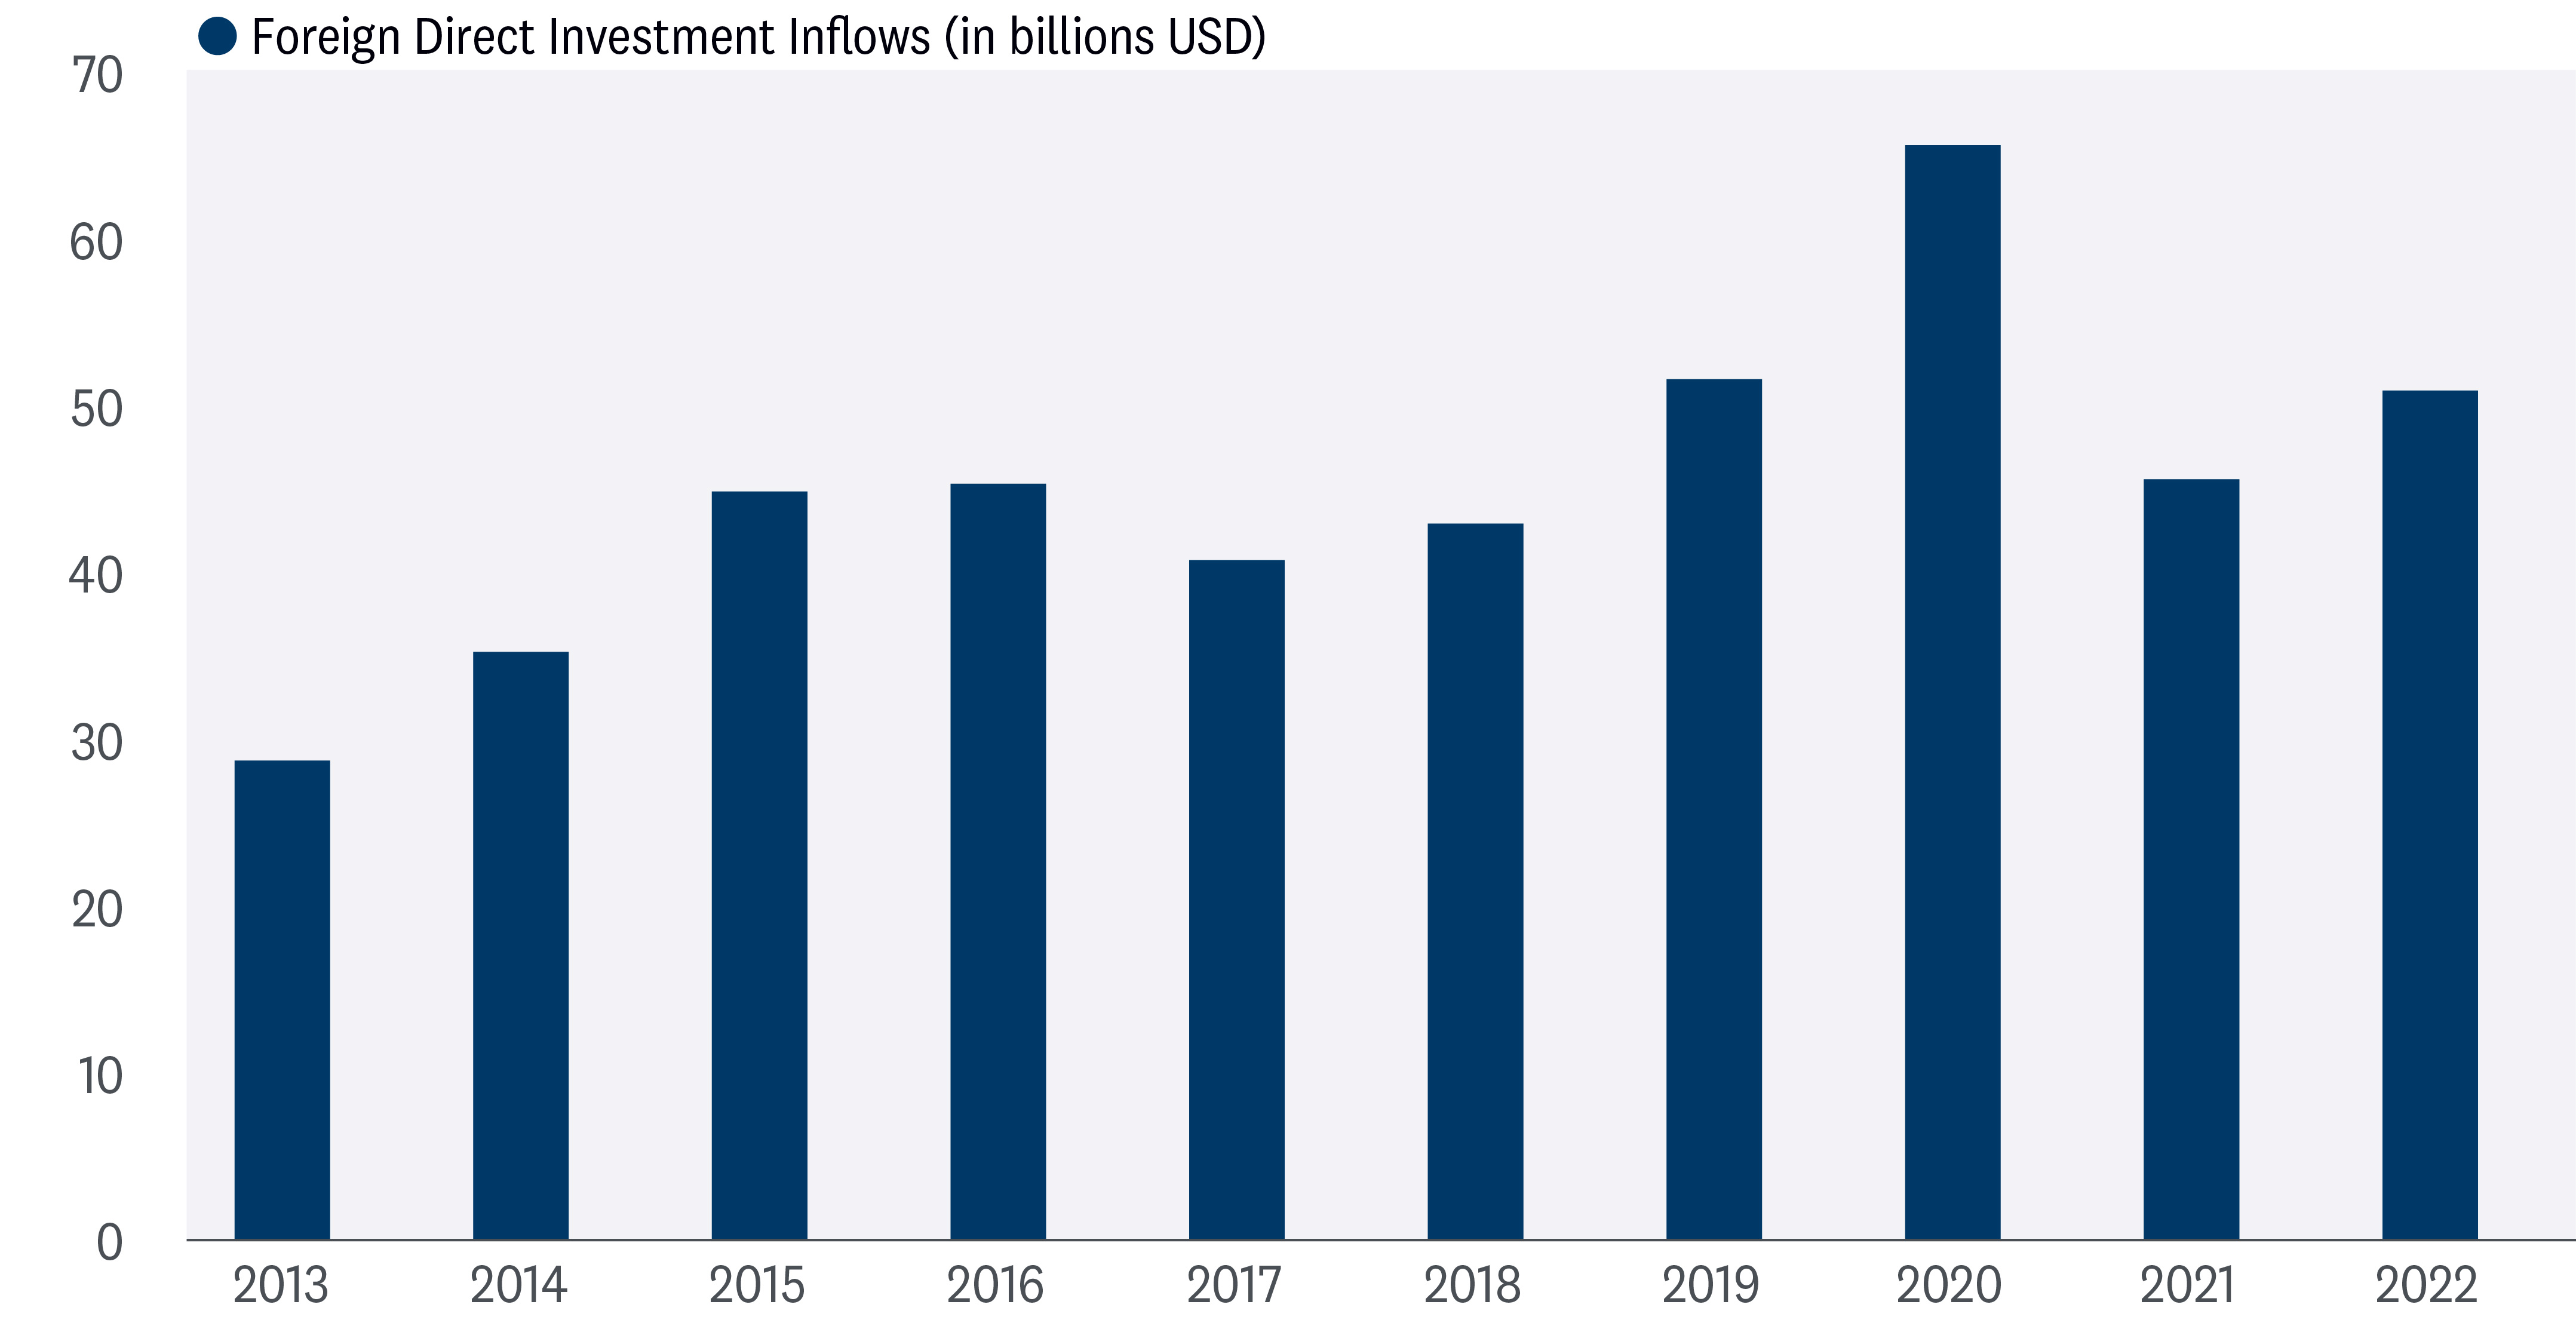 This chart depicts the foreign direct investment inflows into a country over a 10-year period from 2013 to 2022. The y-axis represents the amount of foreign direct investment in billions of USD, while the x-axis represents the year.